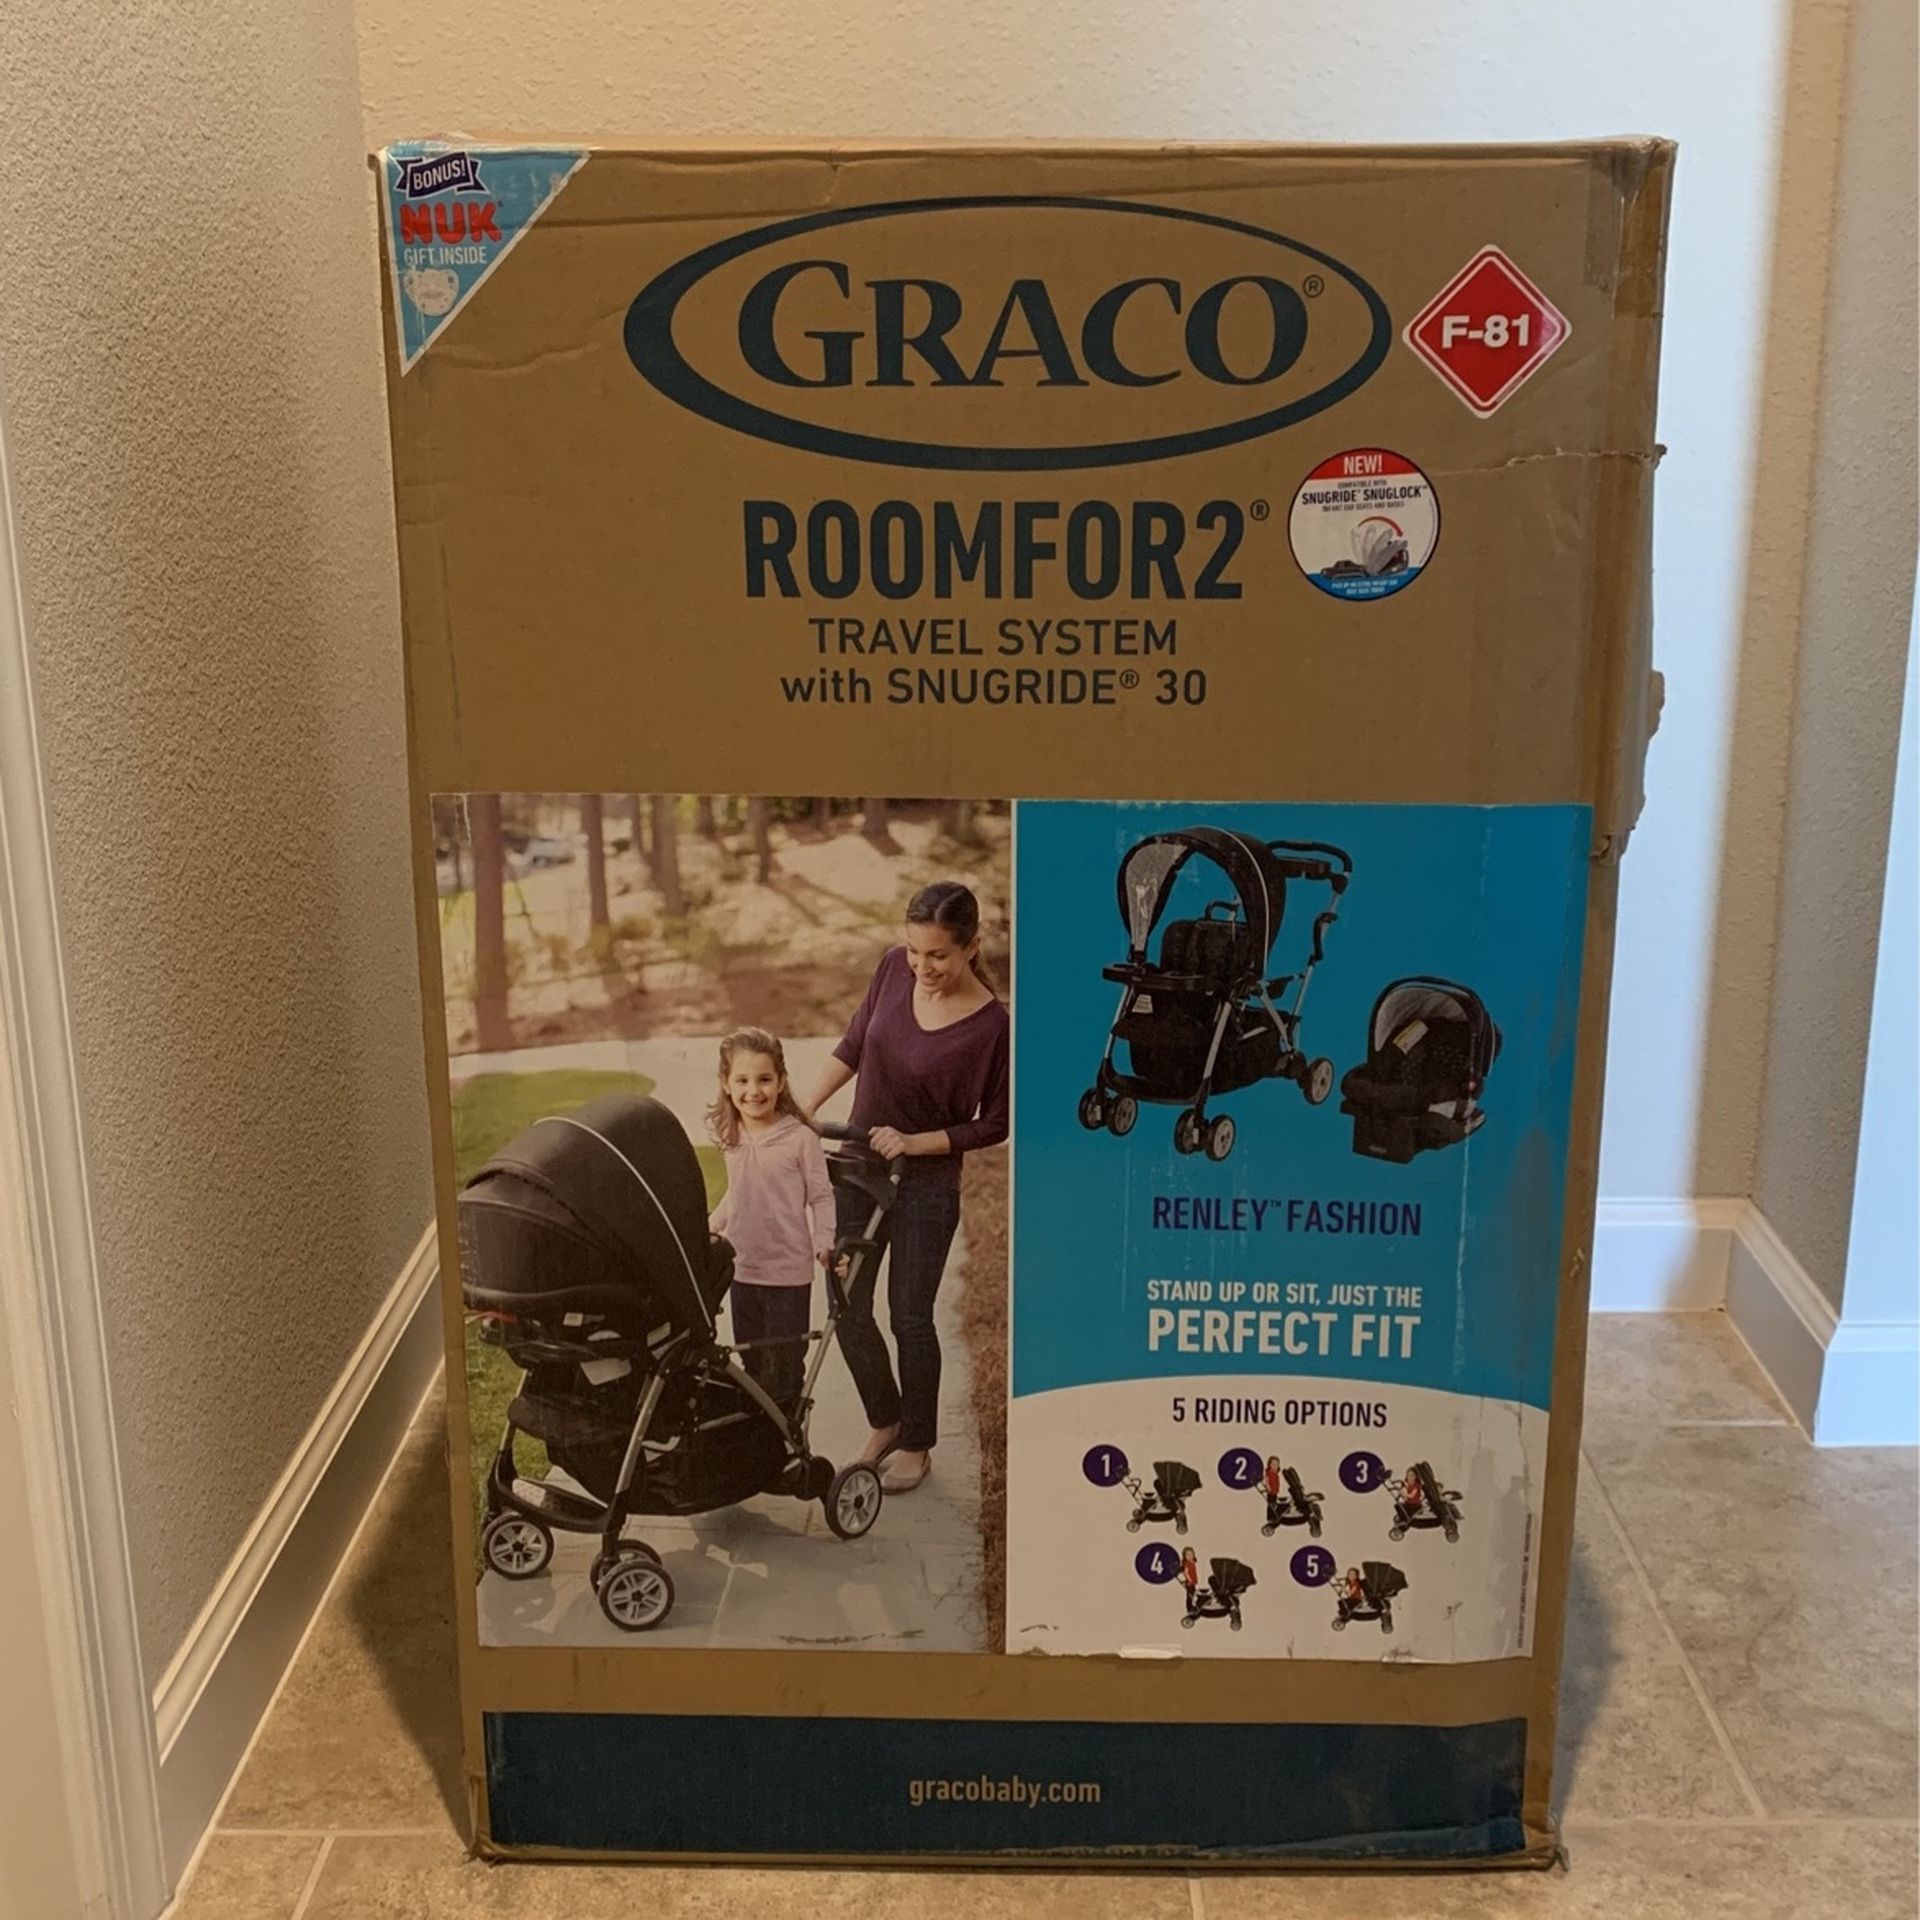 Graco RoomFor2 Travel System with Snugride30 (Stroller/Car Seat)